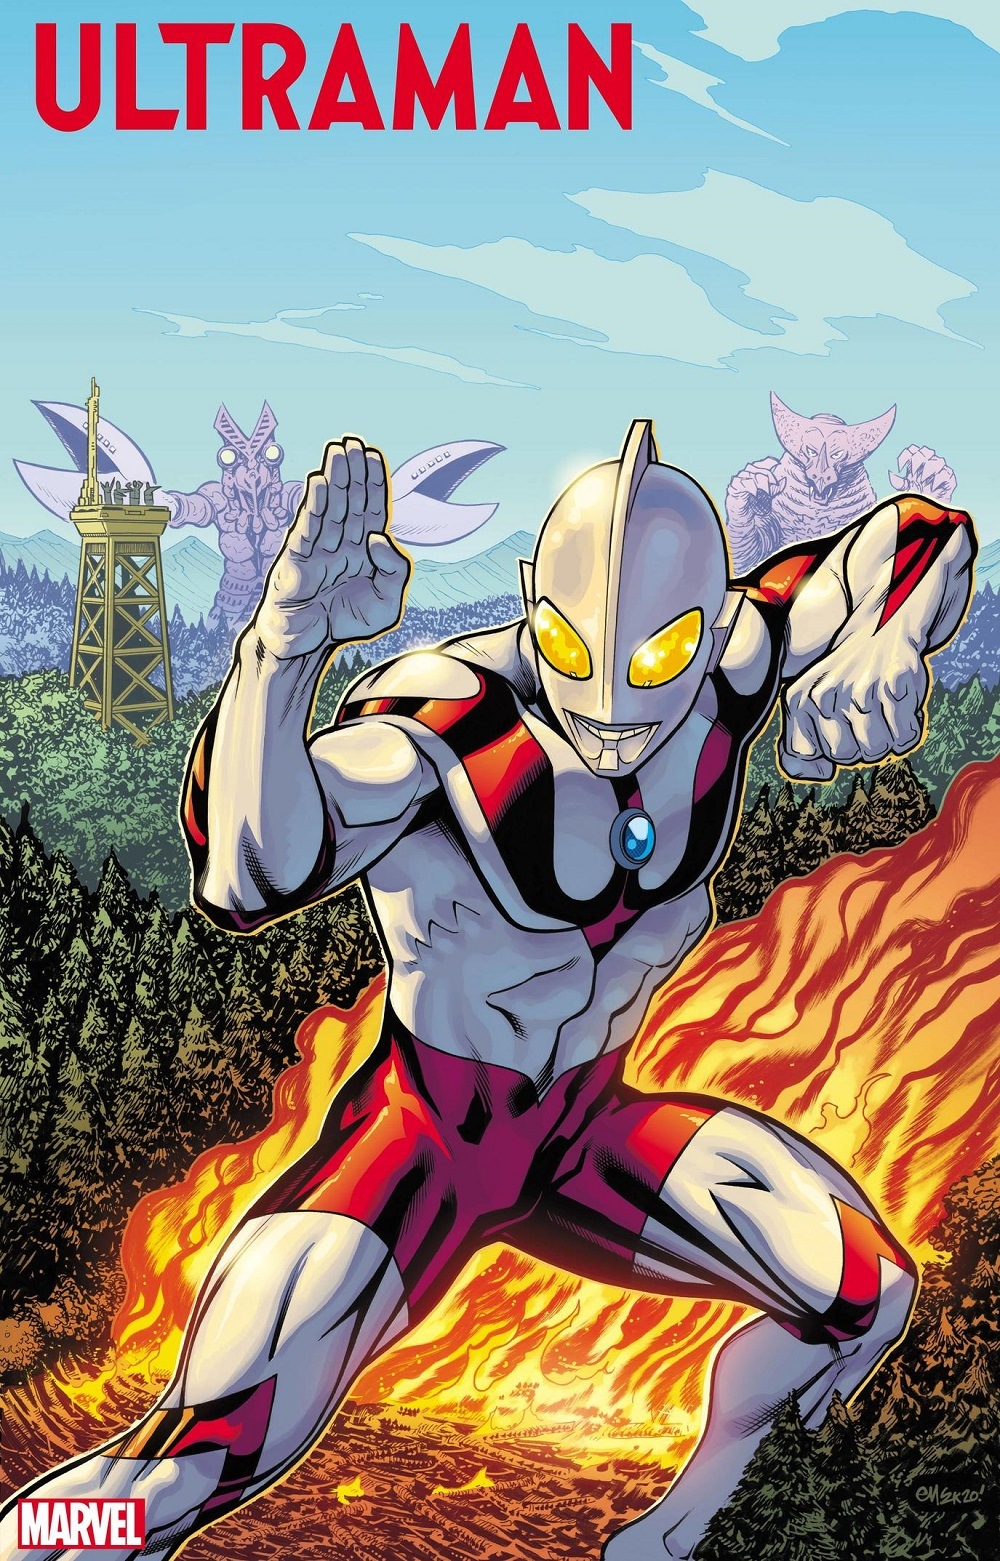 the rise of ultraman issue 1 2020